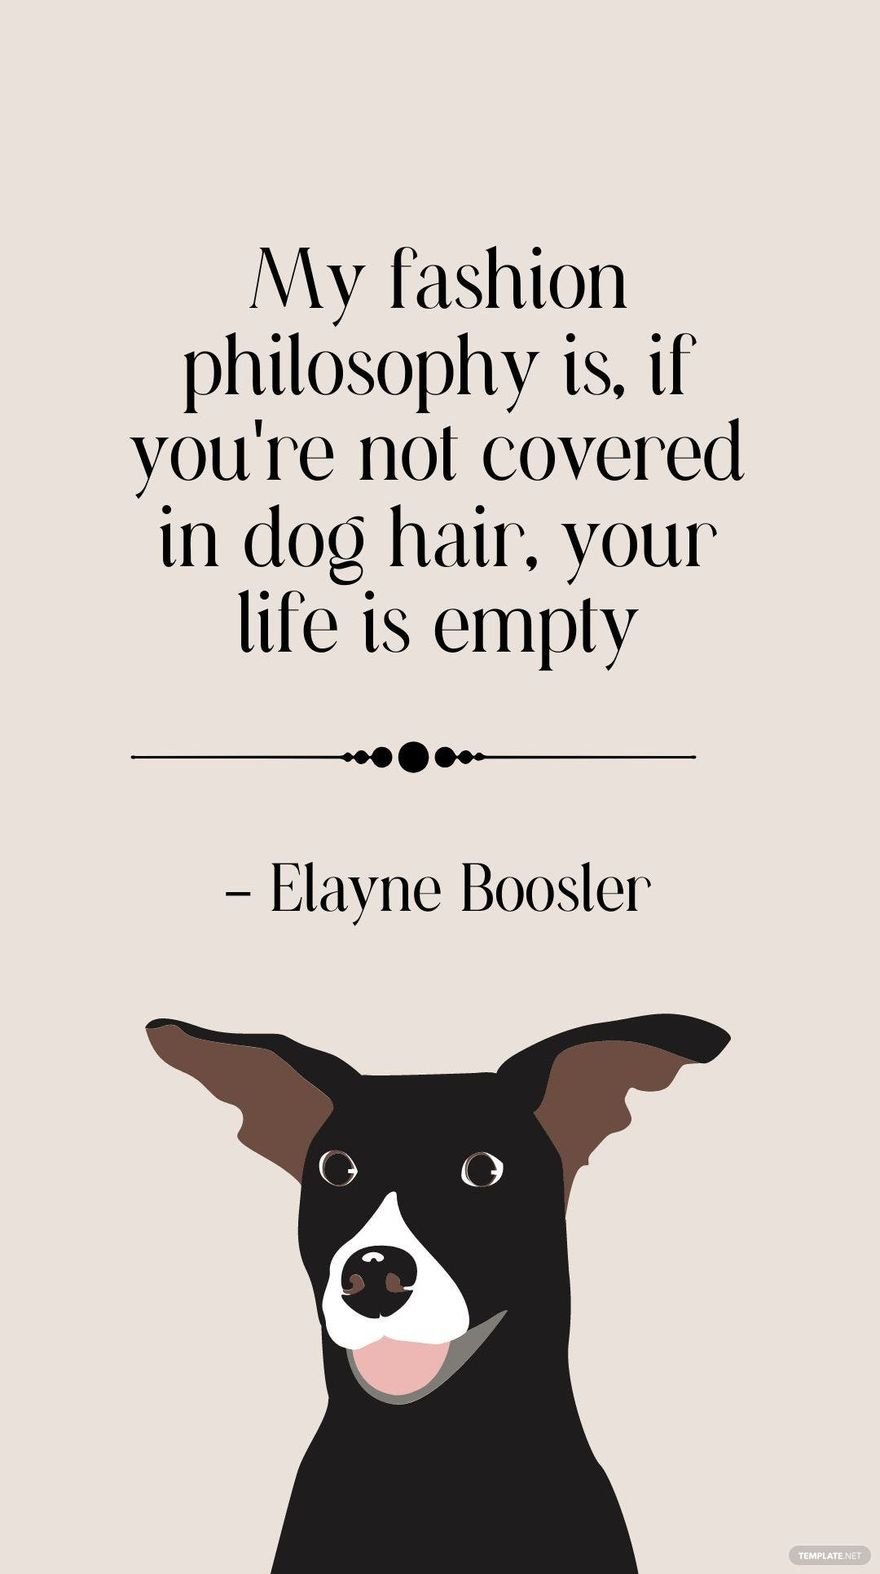 Free Elayne Boosler - My fashion philosophy is, if you're not covered in dog hair, your life is empty in JPG